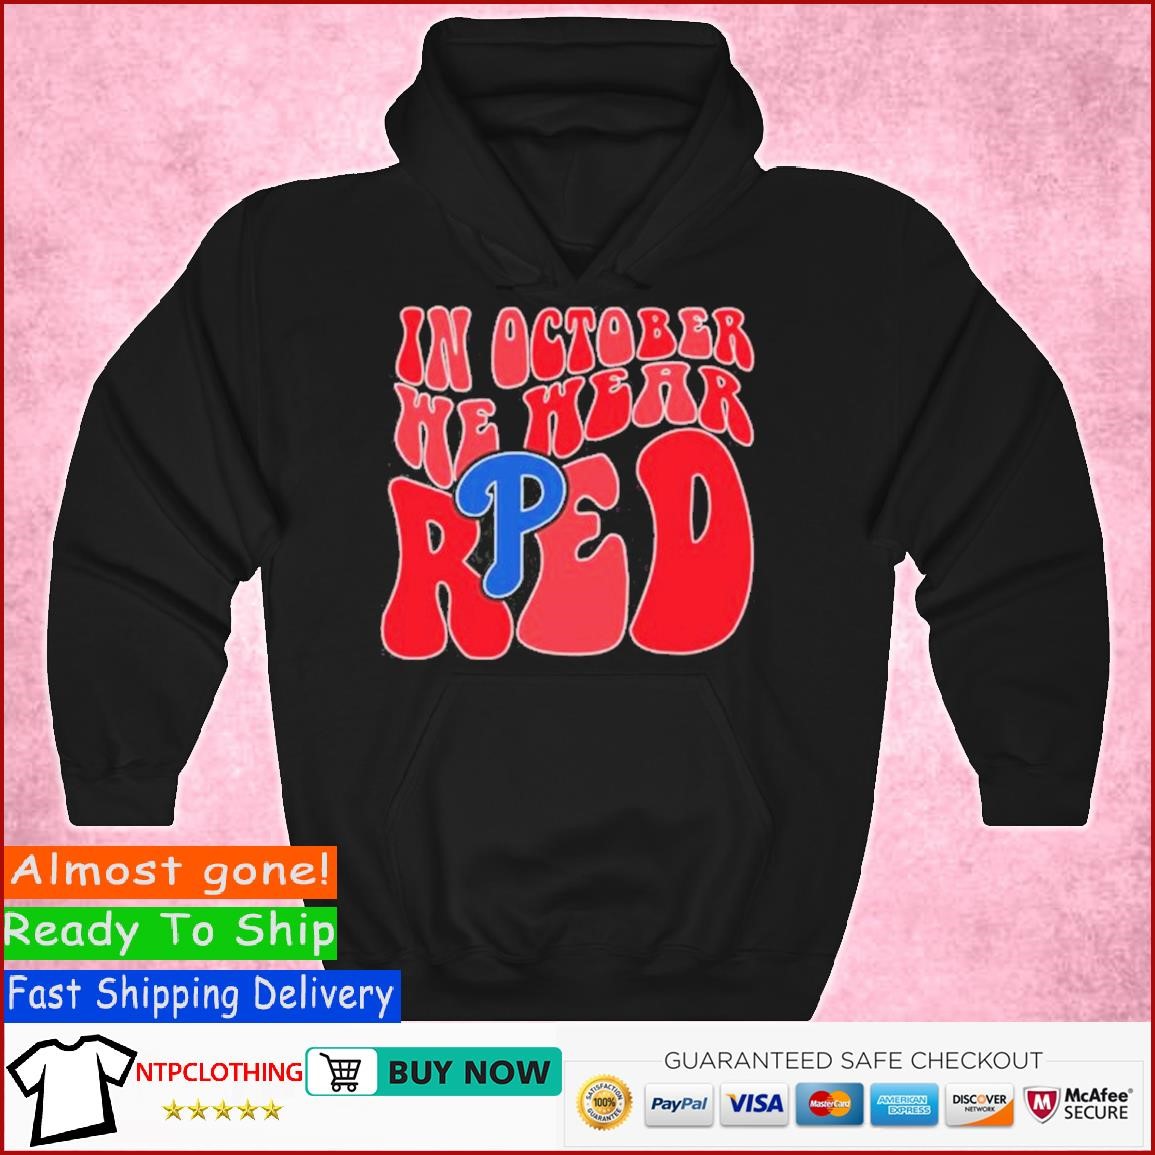 Phillies Take October Shirt Wear Red For Phillies Red October Phillies Shirt  In October We Wear Red Ghost Shirt, hoodie, sweater, long sleeve and tank  top